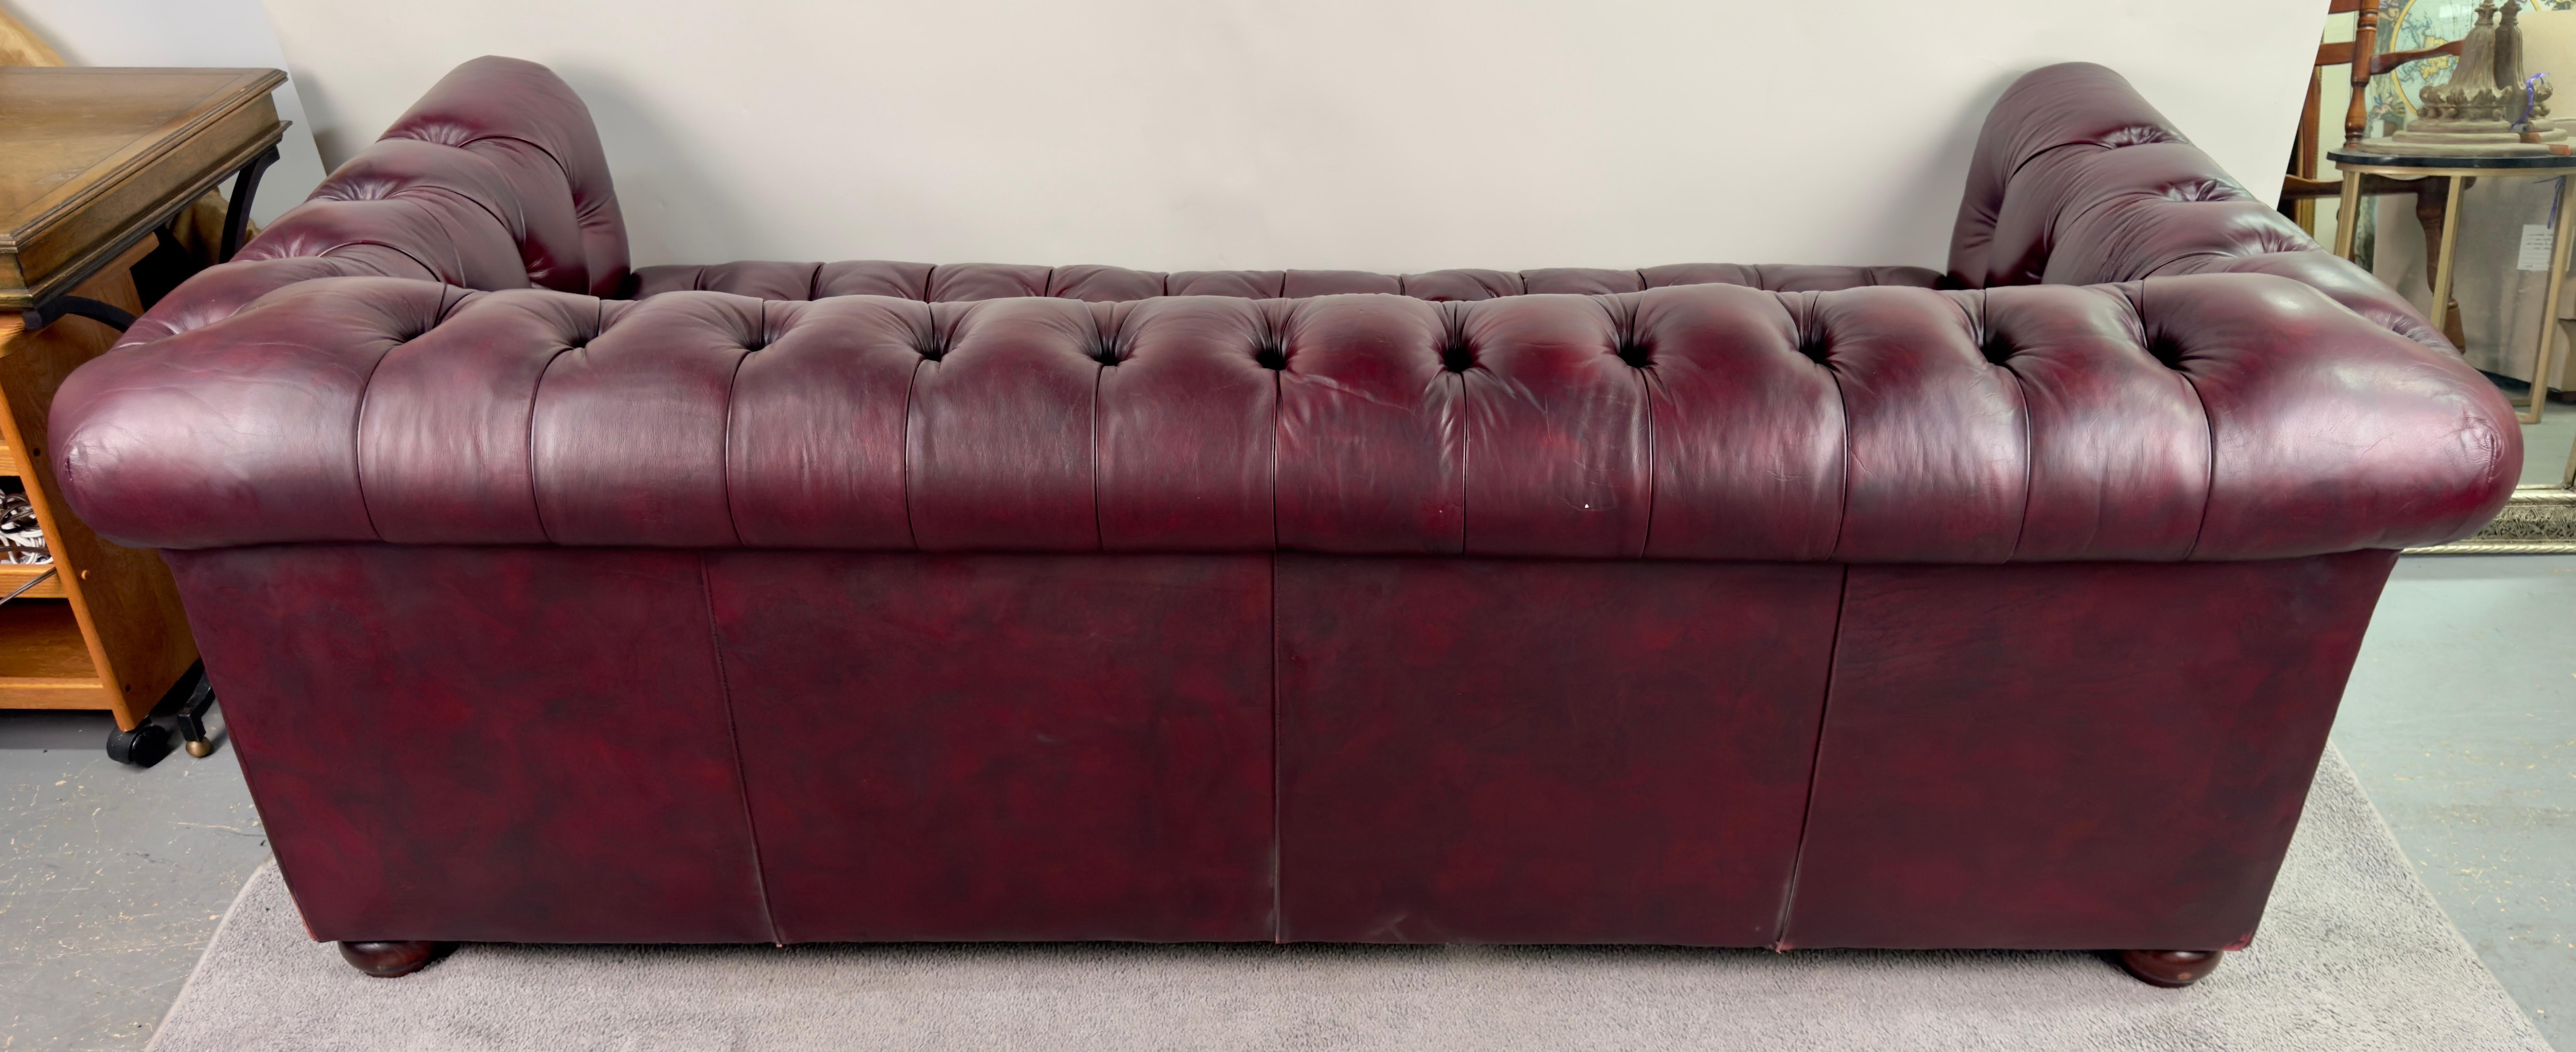 Hancock & Moore English Style Chesterfield Cranberry leather Sofa & Sofa Bed For Sale 5